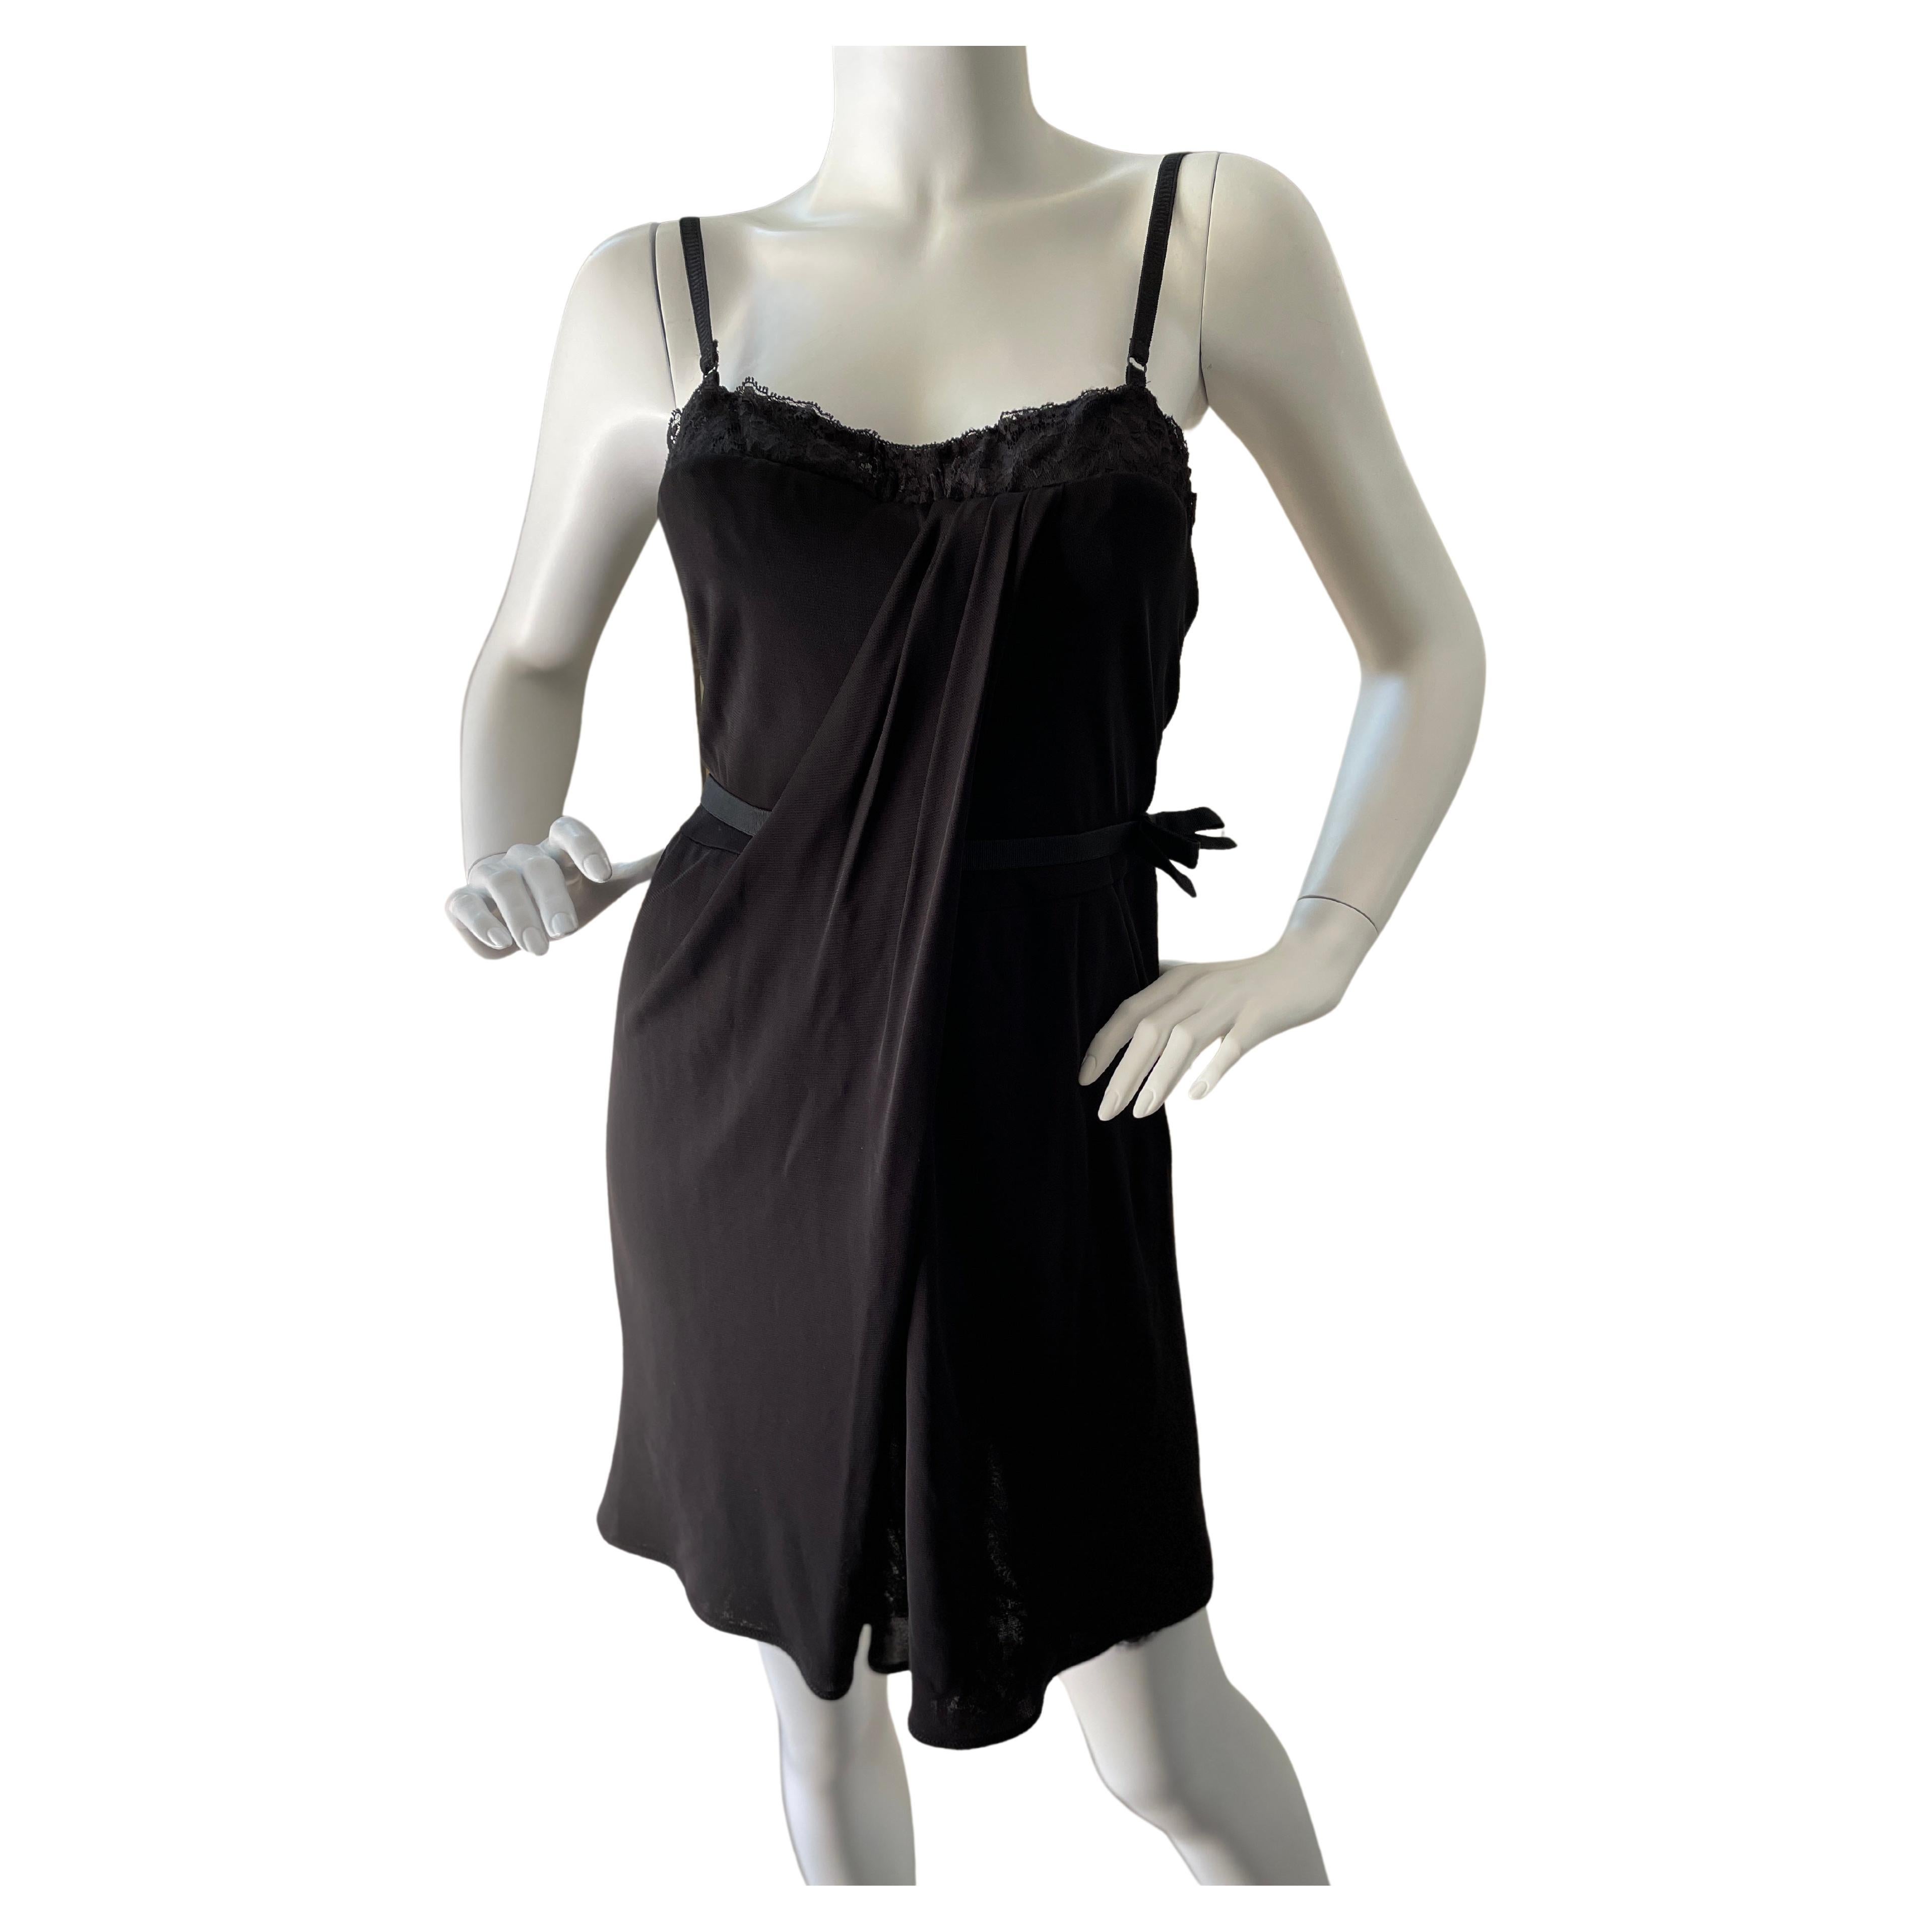 D&G by Dolce & Gabbana Vintage Black Cocktail Dress with Inner Corset NWT For Sale